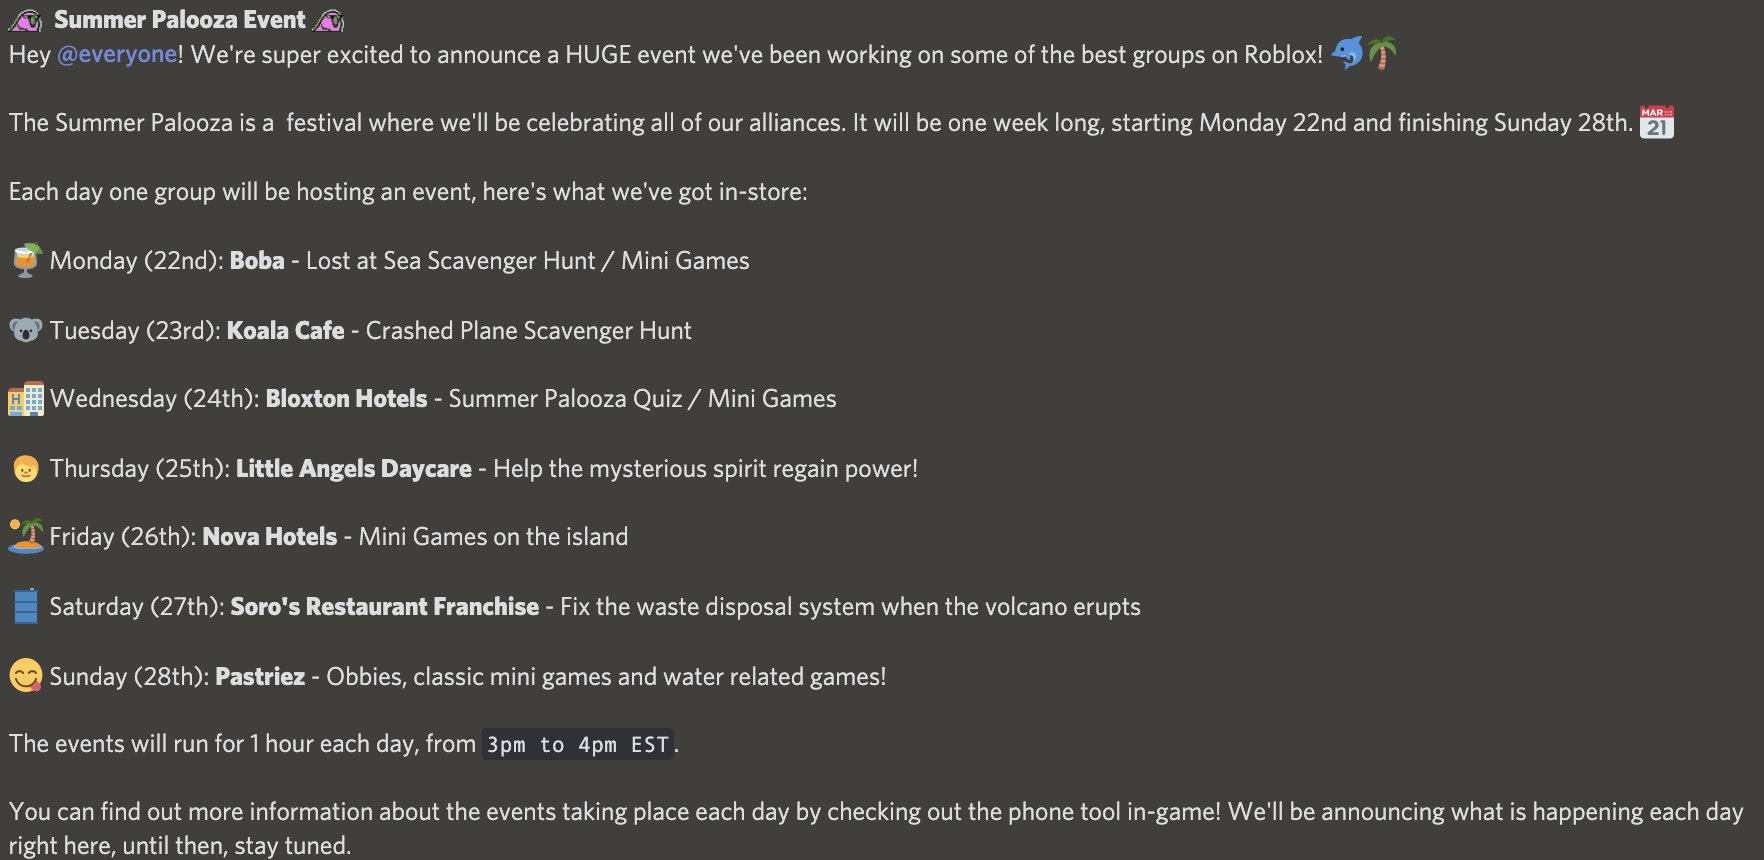 Soro S Restaurant On Twitter Summer Palooza Event Starts On Monday More Information In The Image - roblox groups nova hotels